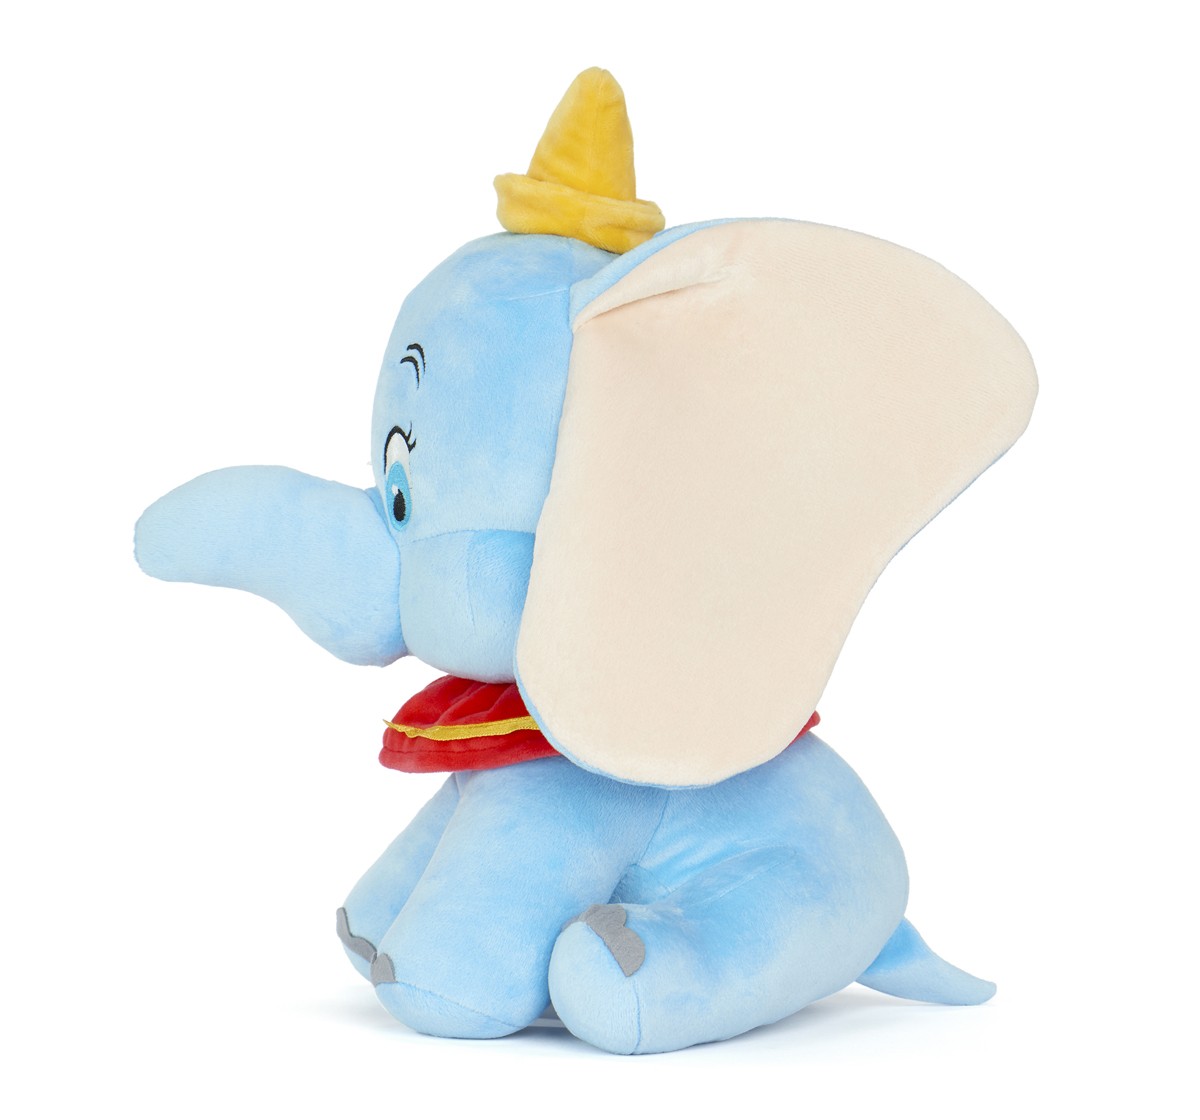 Disney Classic Dumbo 12 Inch Soft Toy for Kids, Multicolor 2Y+